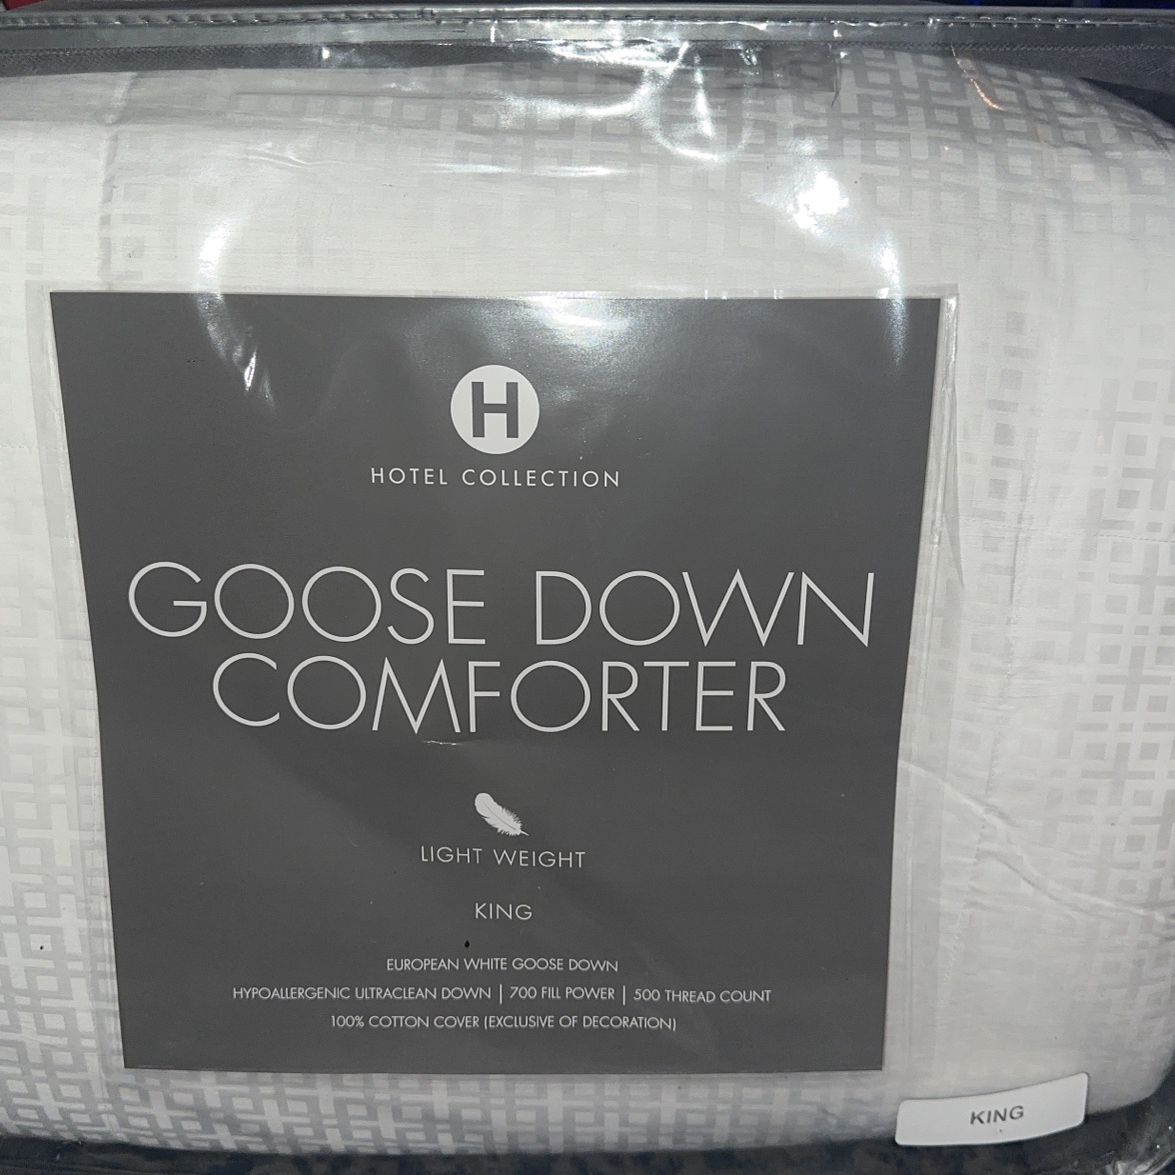 Hotel Collection Goose Down Comforter - King Size Original Price: $680